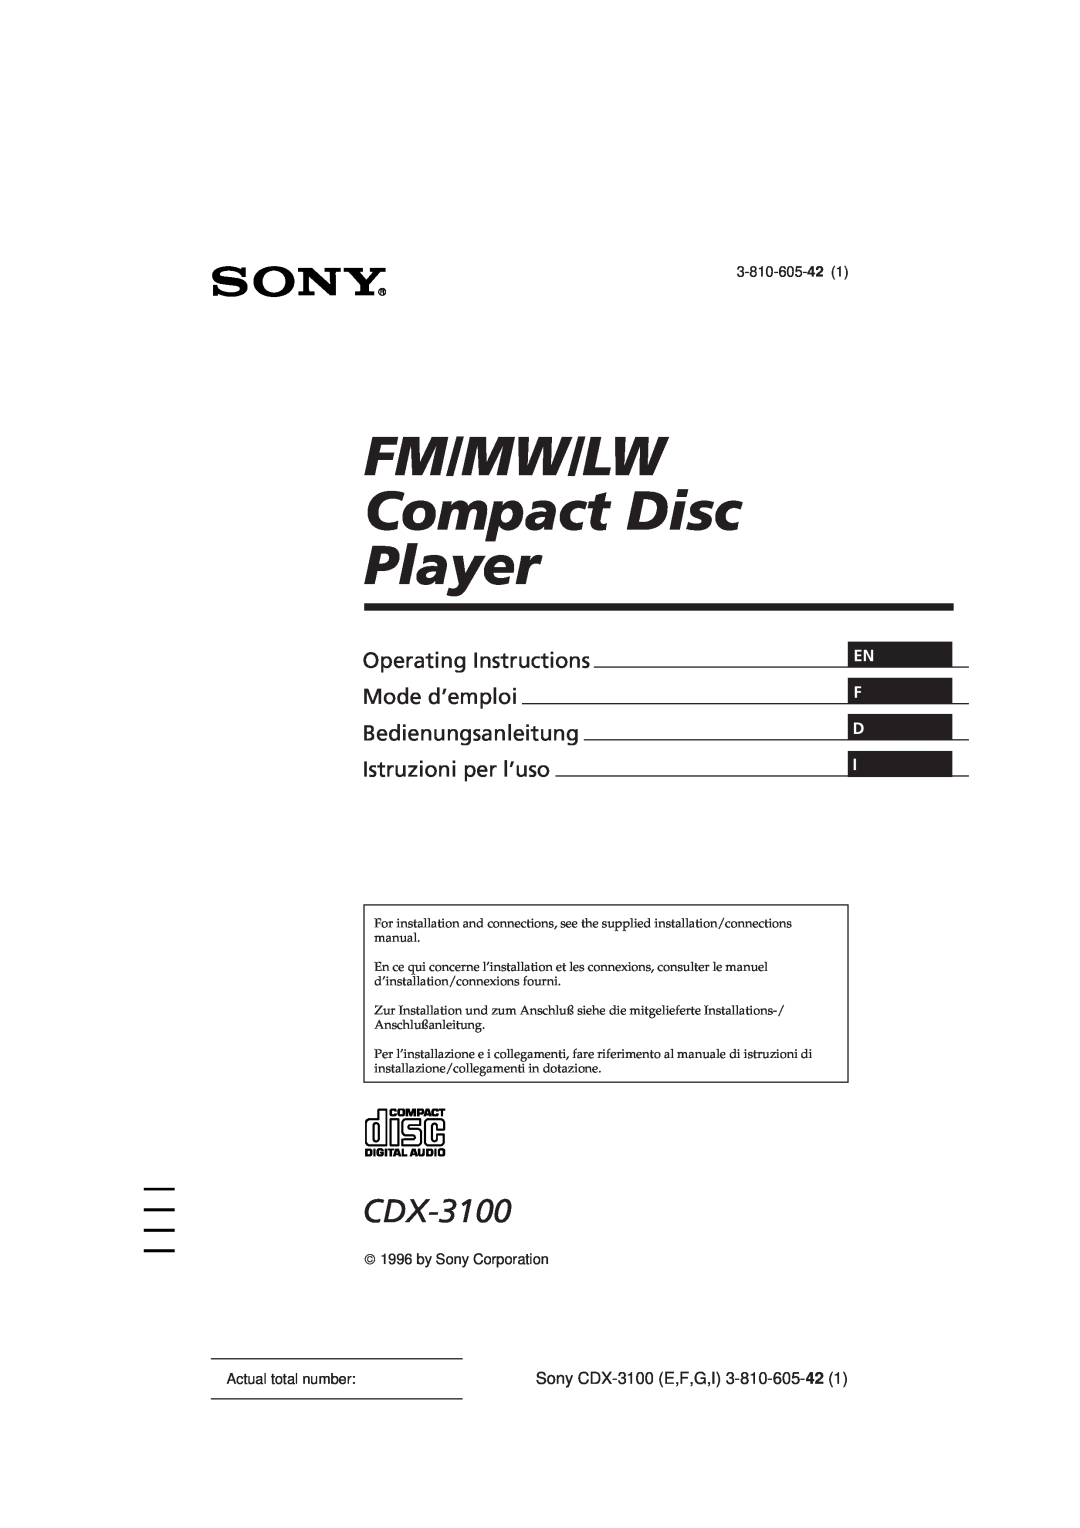 Sony manual En F D, 3-810-605-42, by Sony Corporation, Actual total number, Sony CDX-3100E,F,G,I 